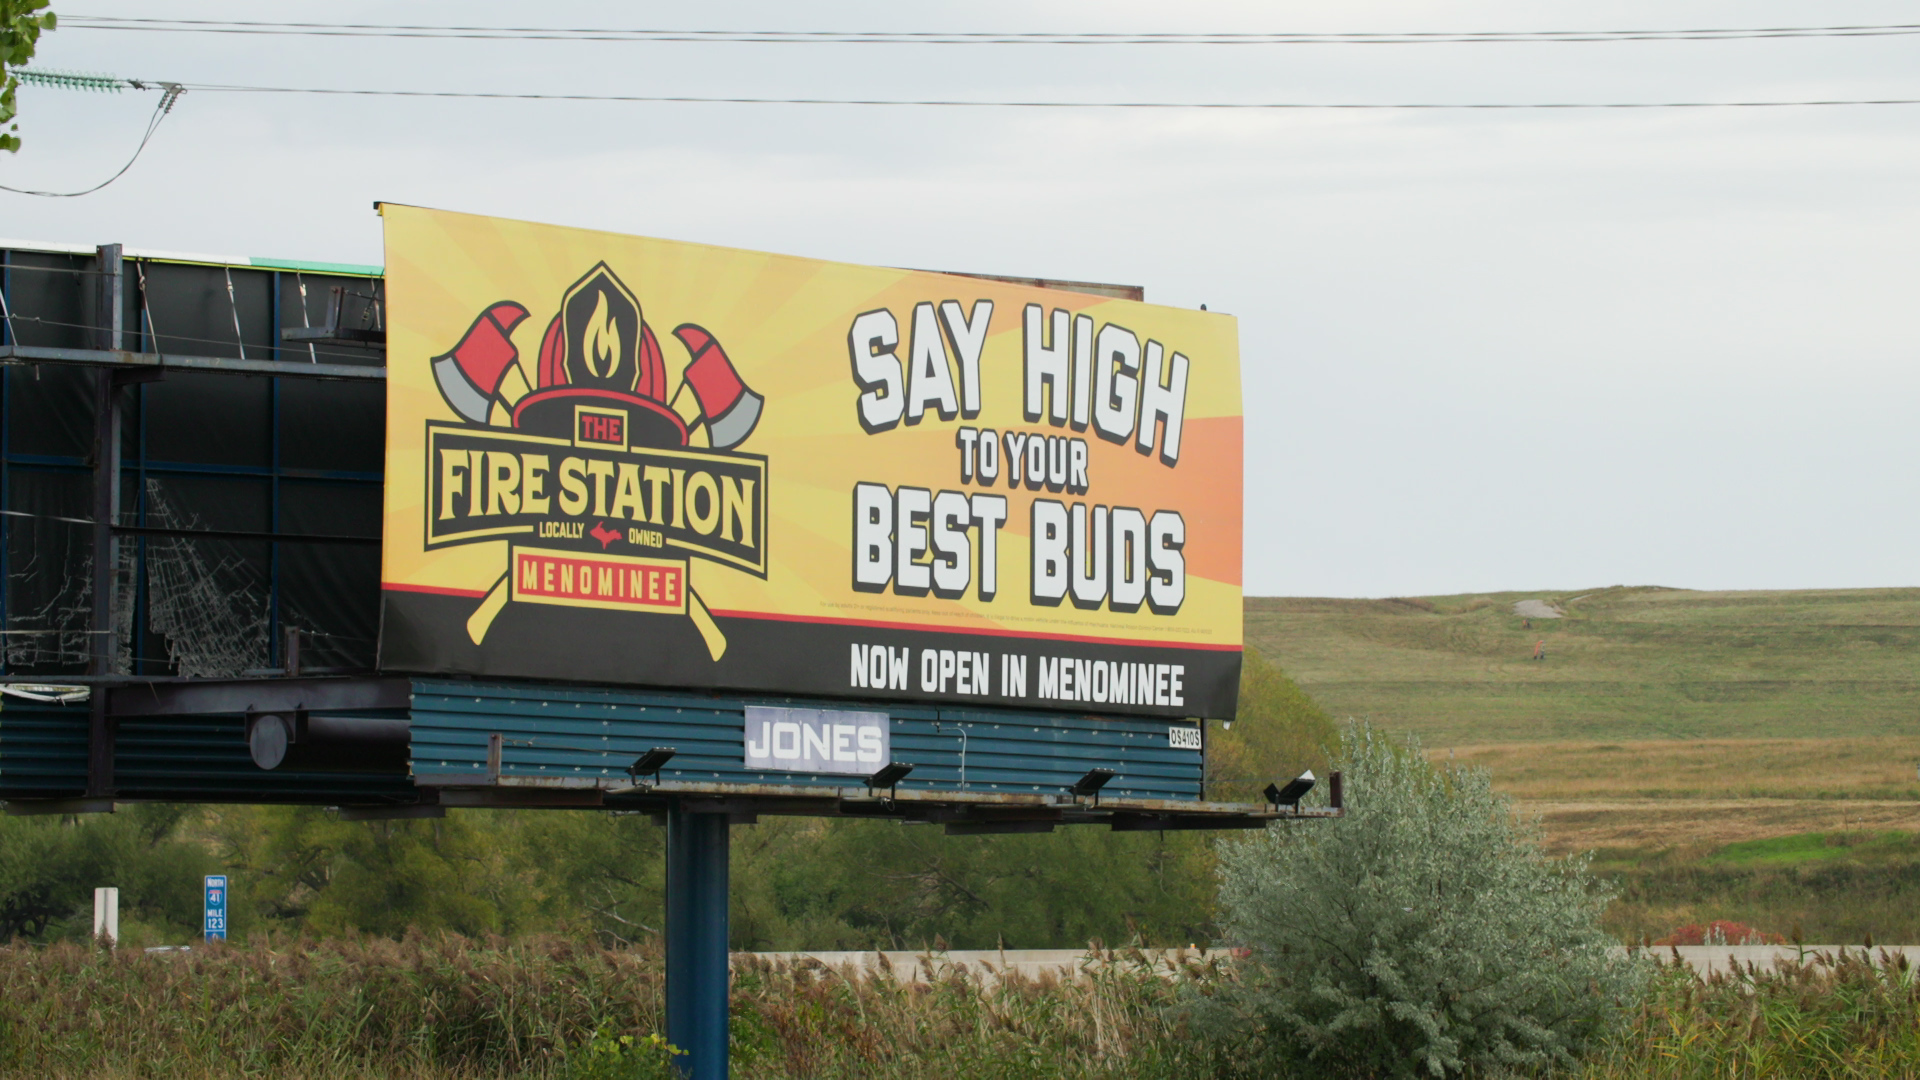 A billboard with the words "Say High to Your Best Buds" and "Now Open in Menominee" and a "The Fire Station" marijuana dispensary logo with a helmet and crossed axes stands next to a highway, with grass-covered hillsides in the background.